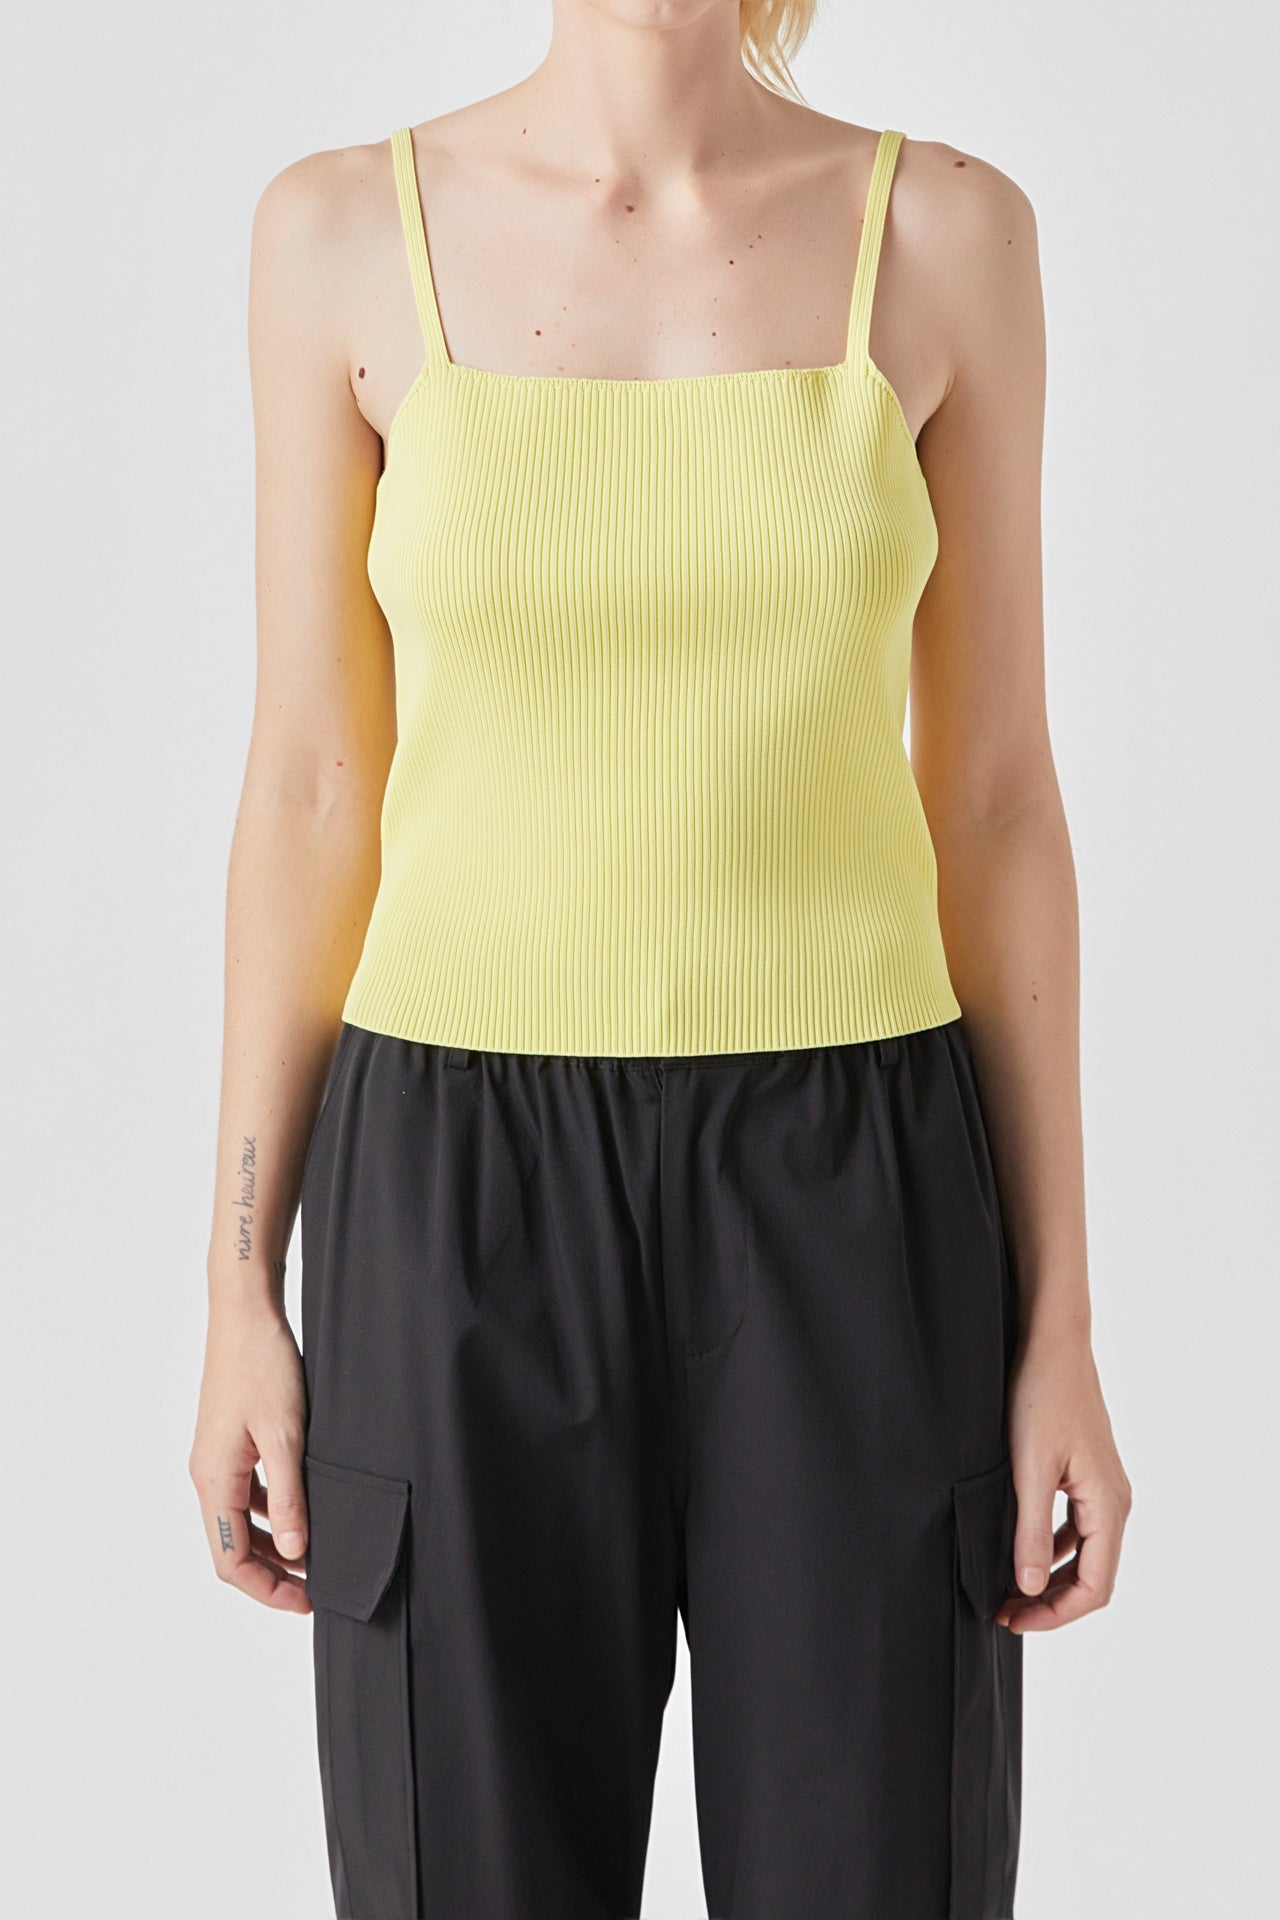 GREY LAB - Classic Rib Knit Everyday Tank - CAMI TOPS & TANK available at Objectrare